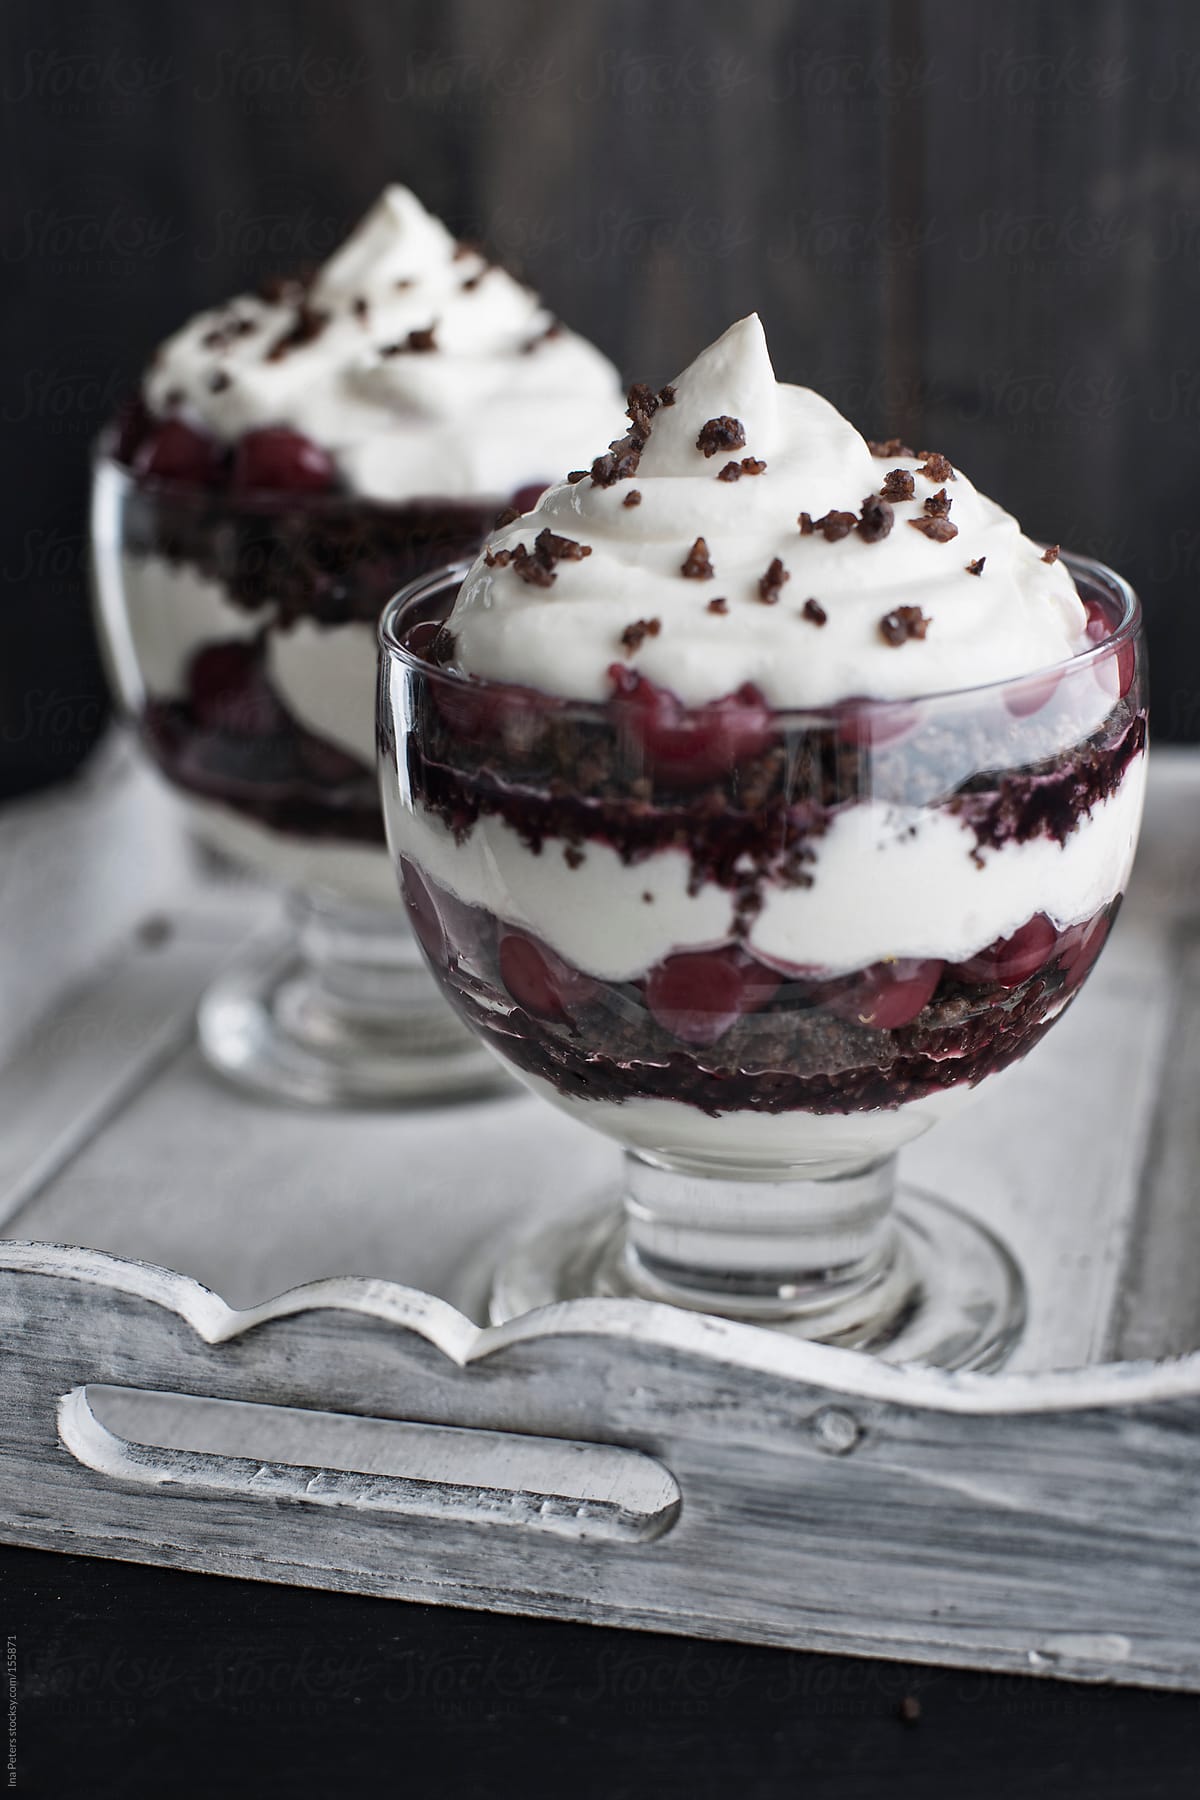 Food: Layered Dessert with Red Wine Marinated Cherries, Whipped